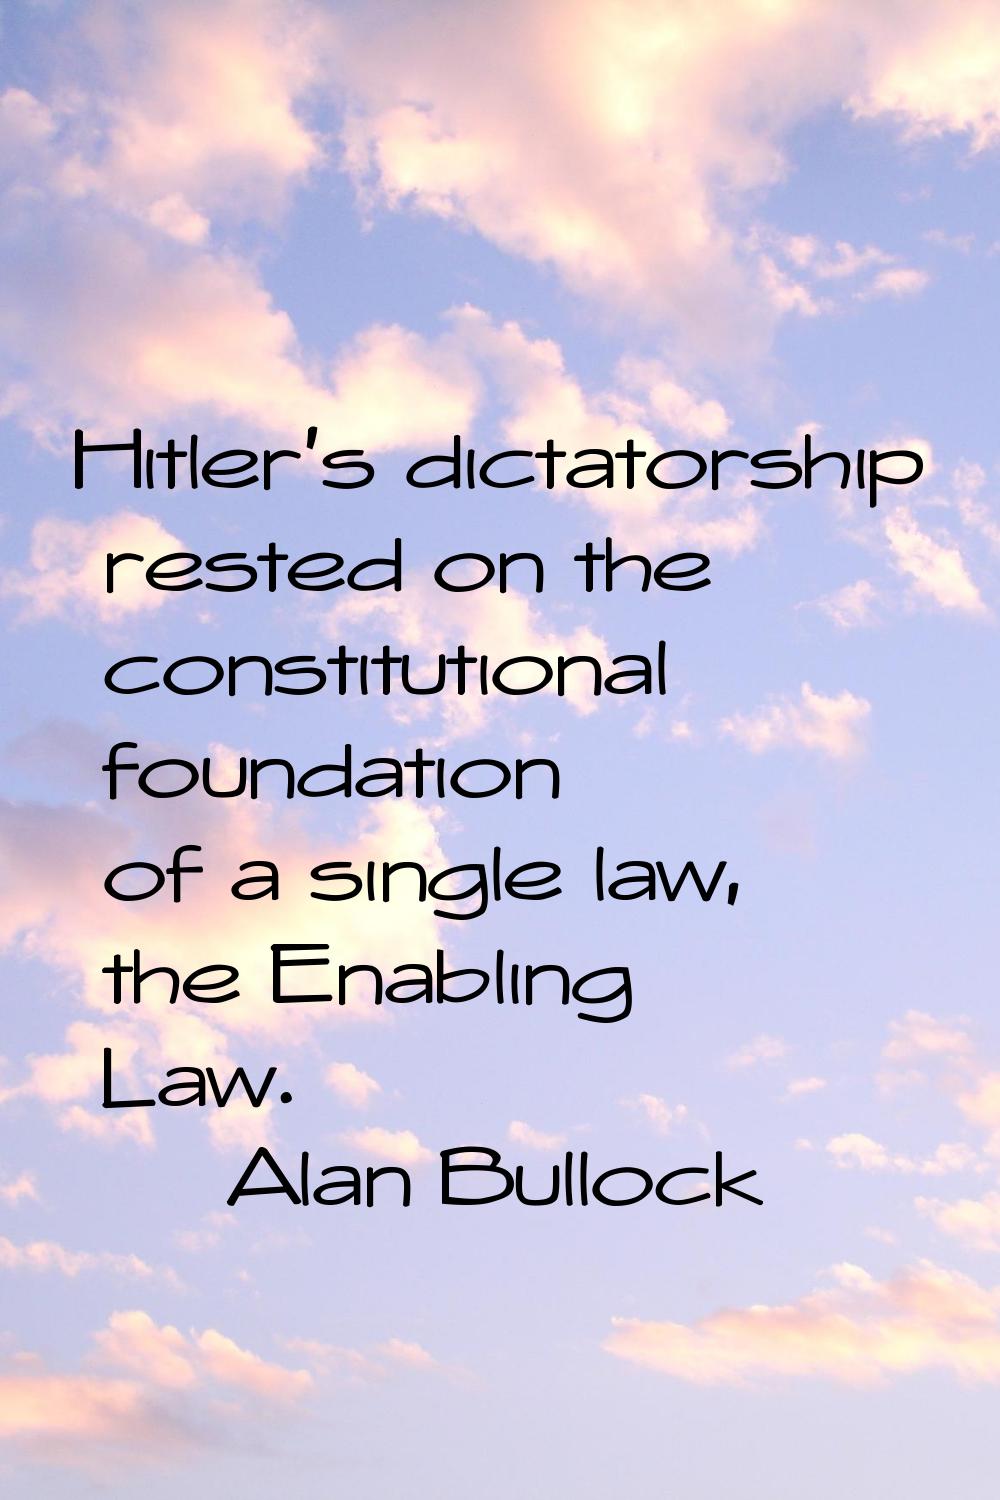 Hitler's dictatorship rested on the constitutional foundation of a single law, the Enabling Law.